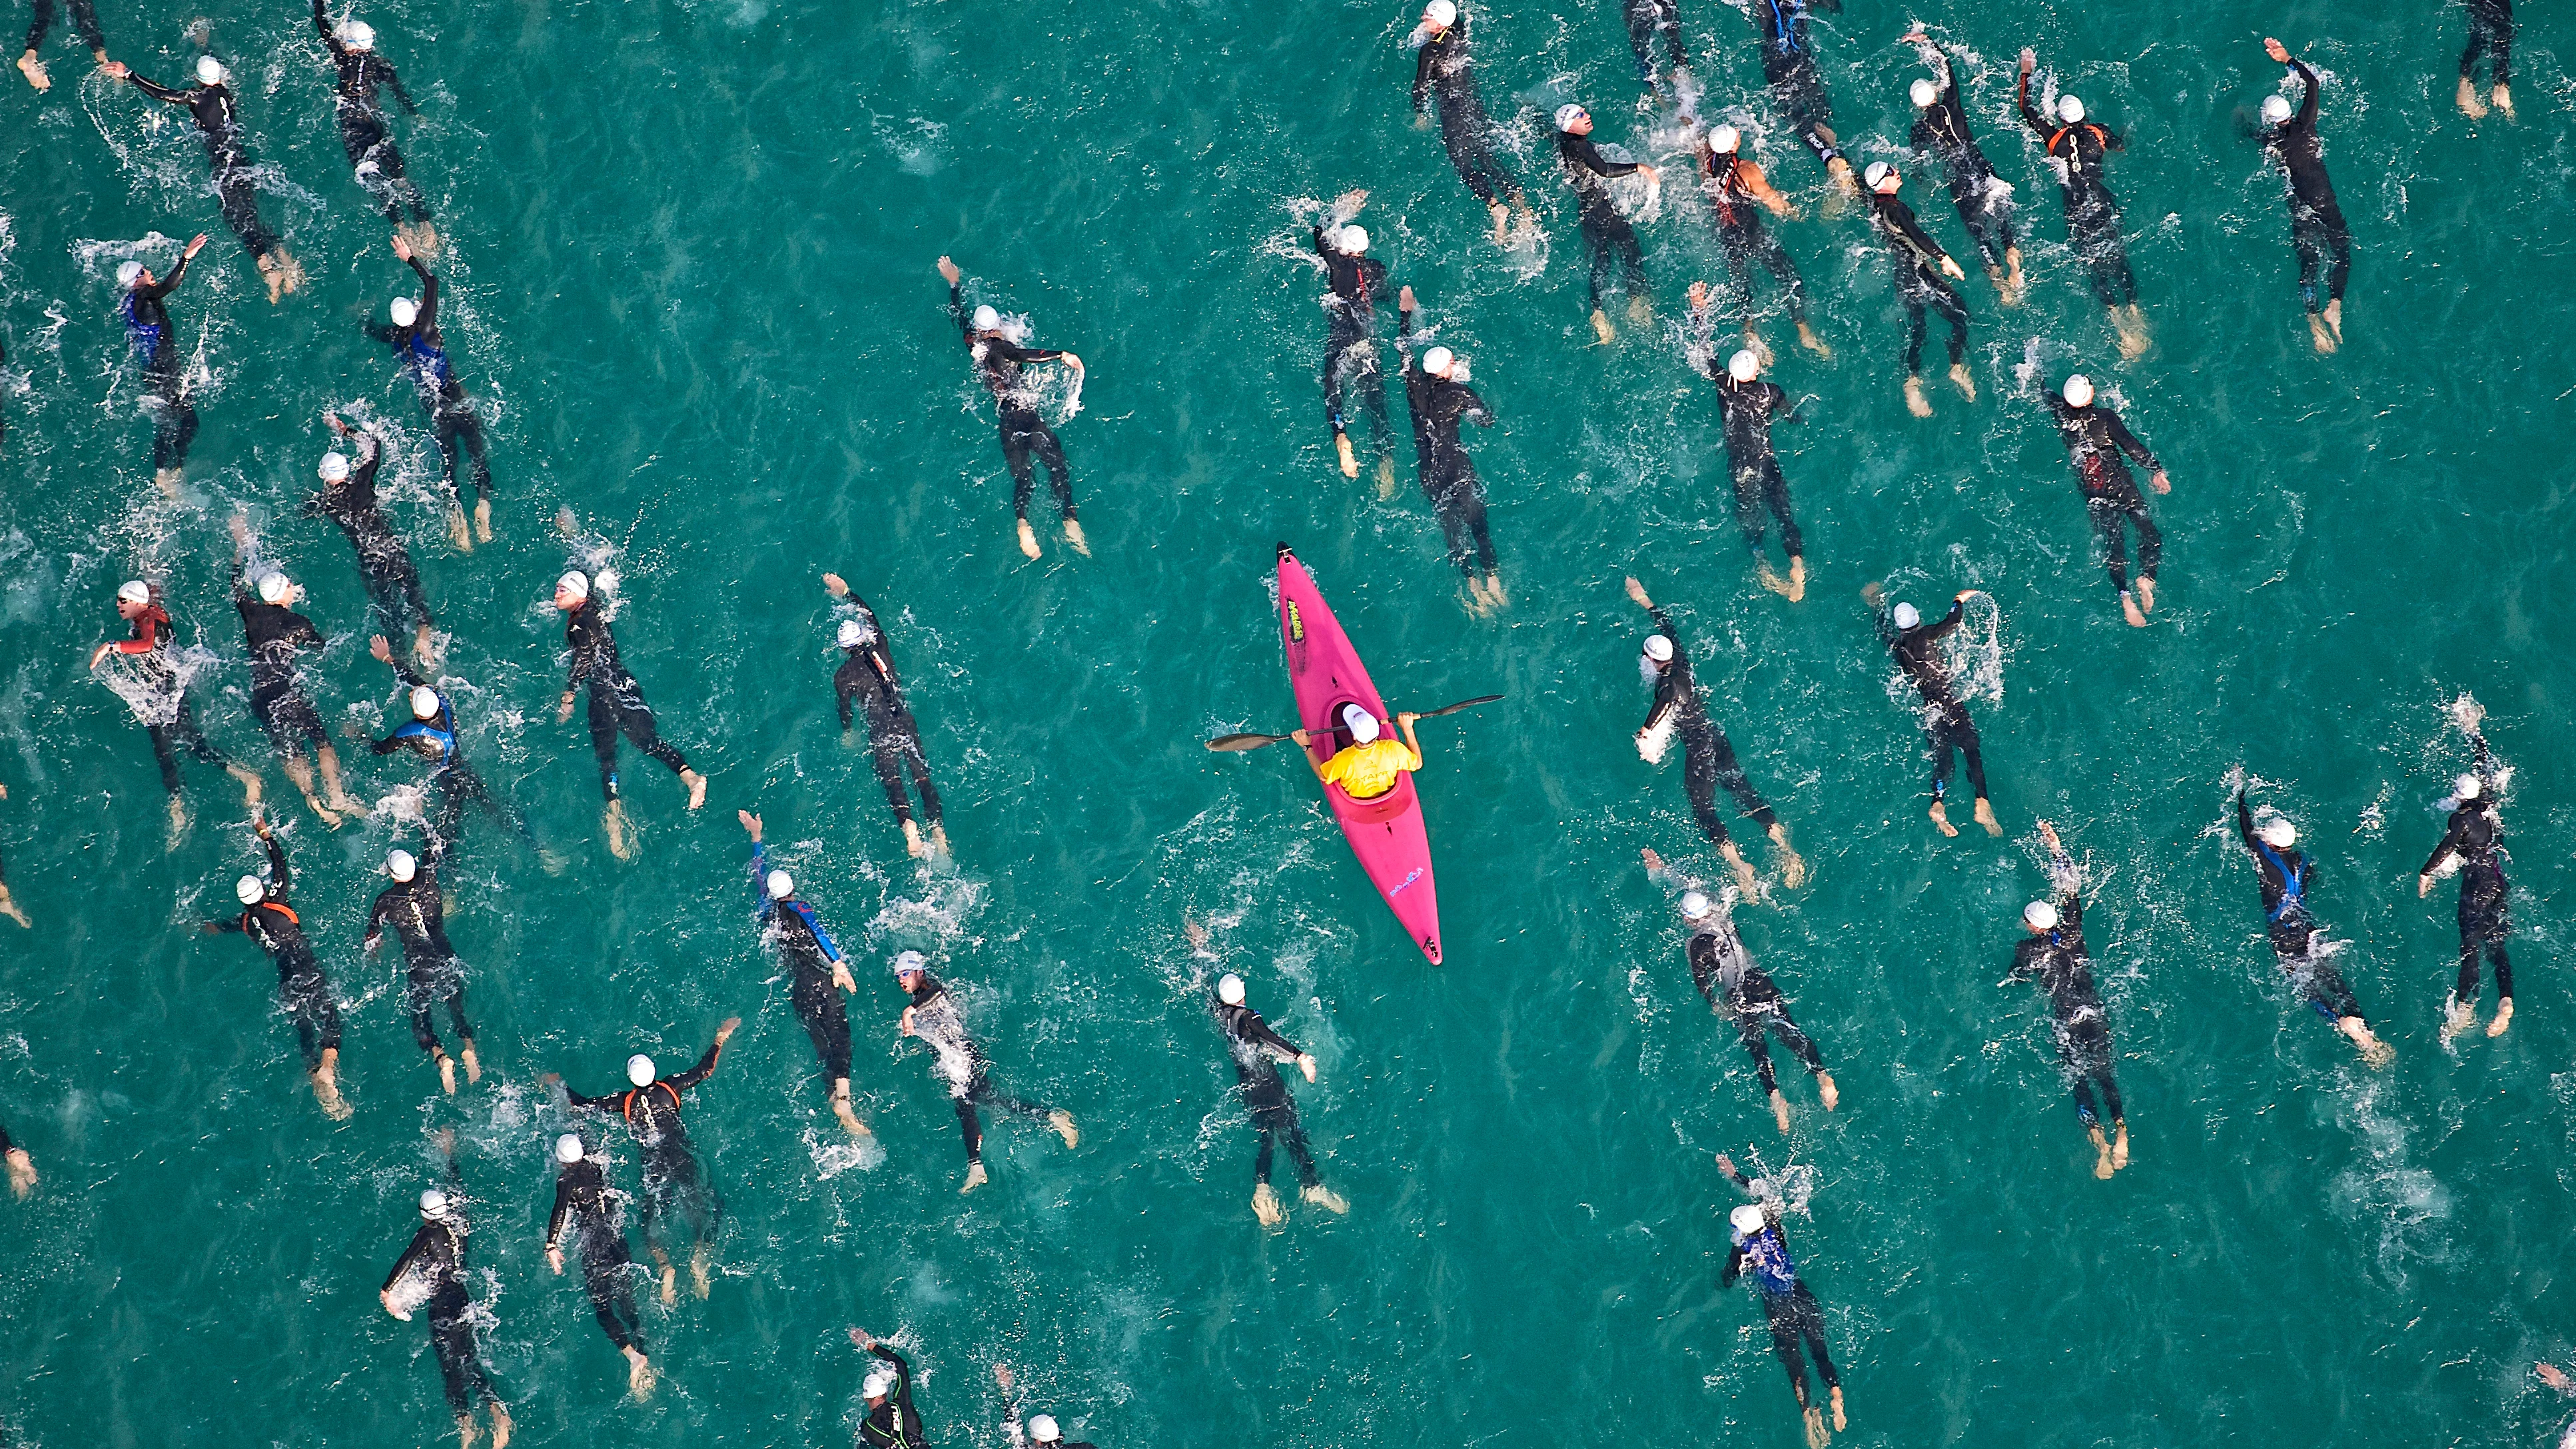 Swimmers in water - stage image for Munich Re Solutions overview page